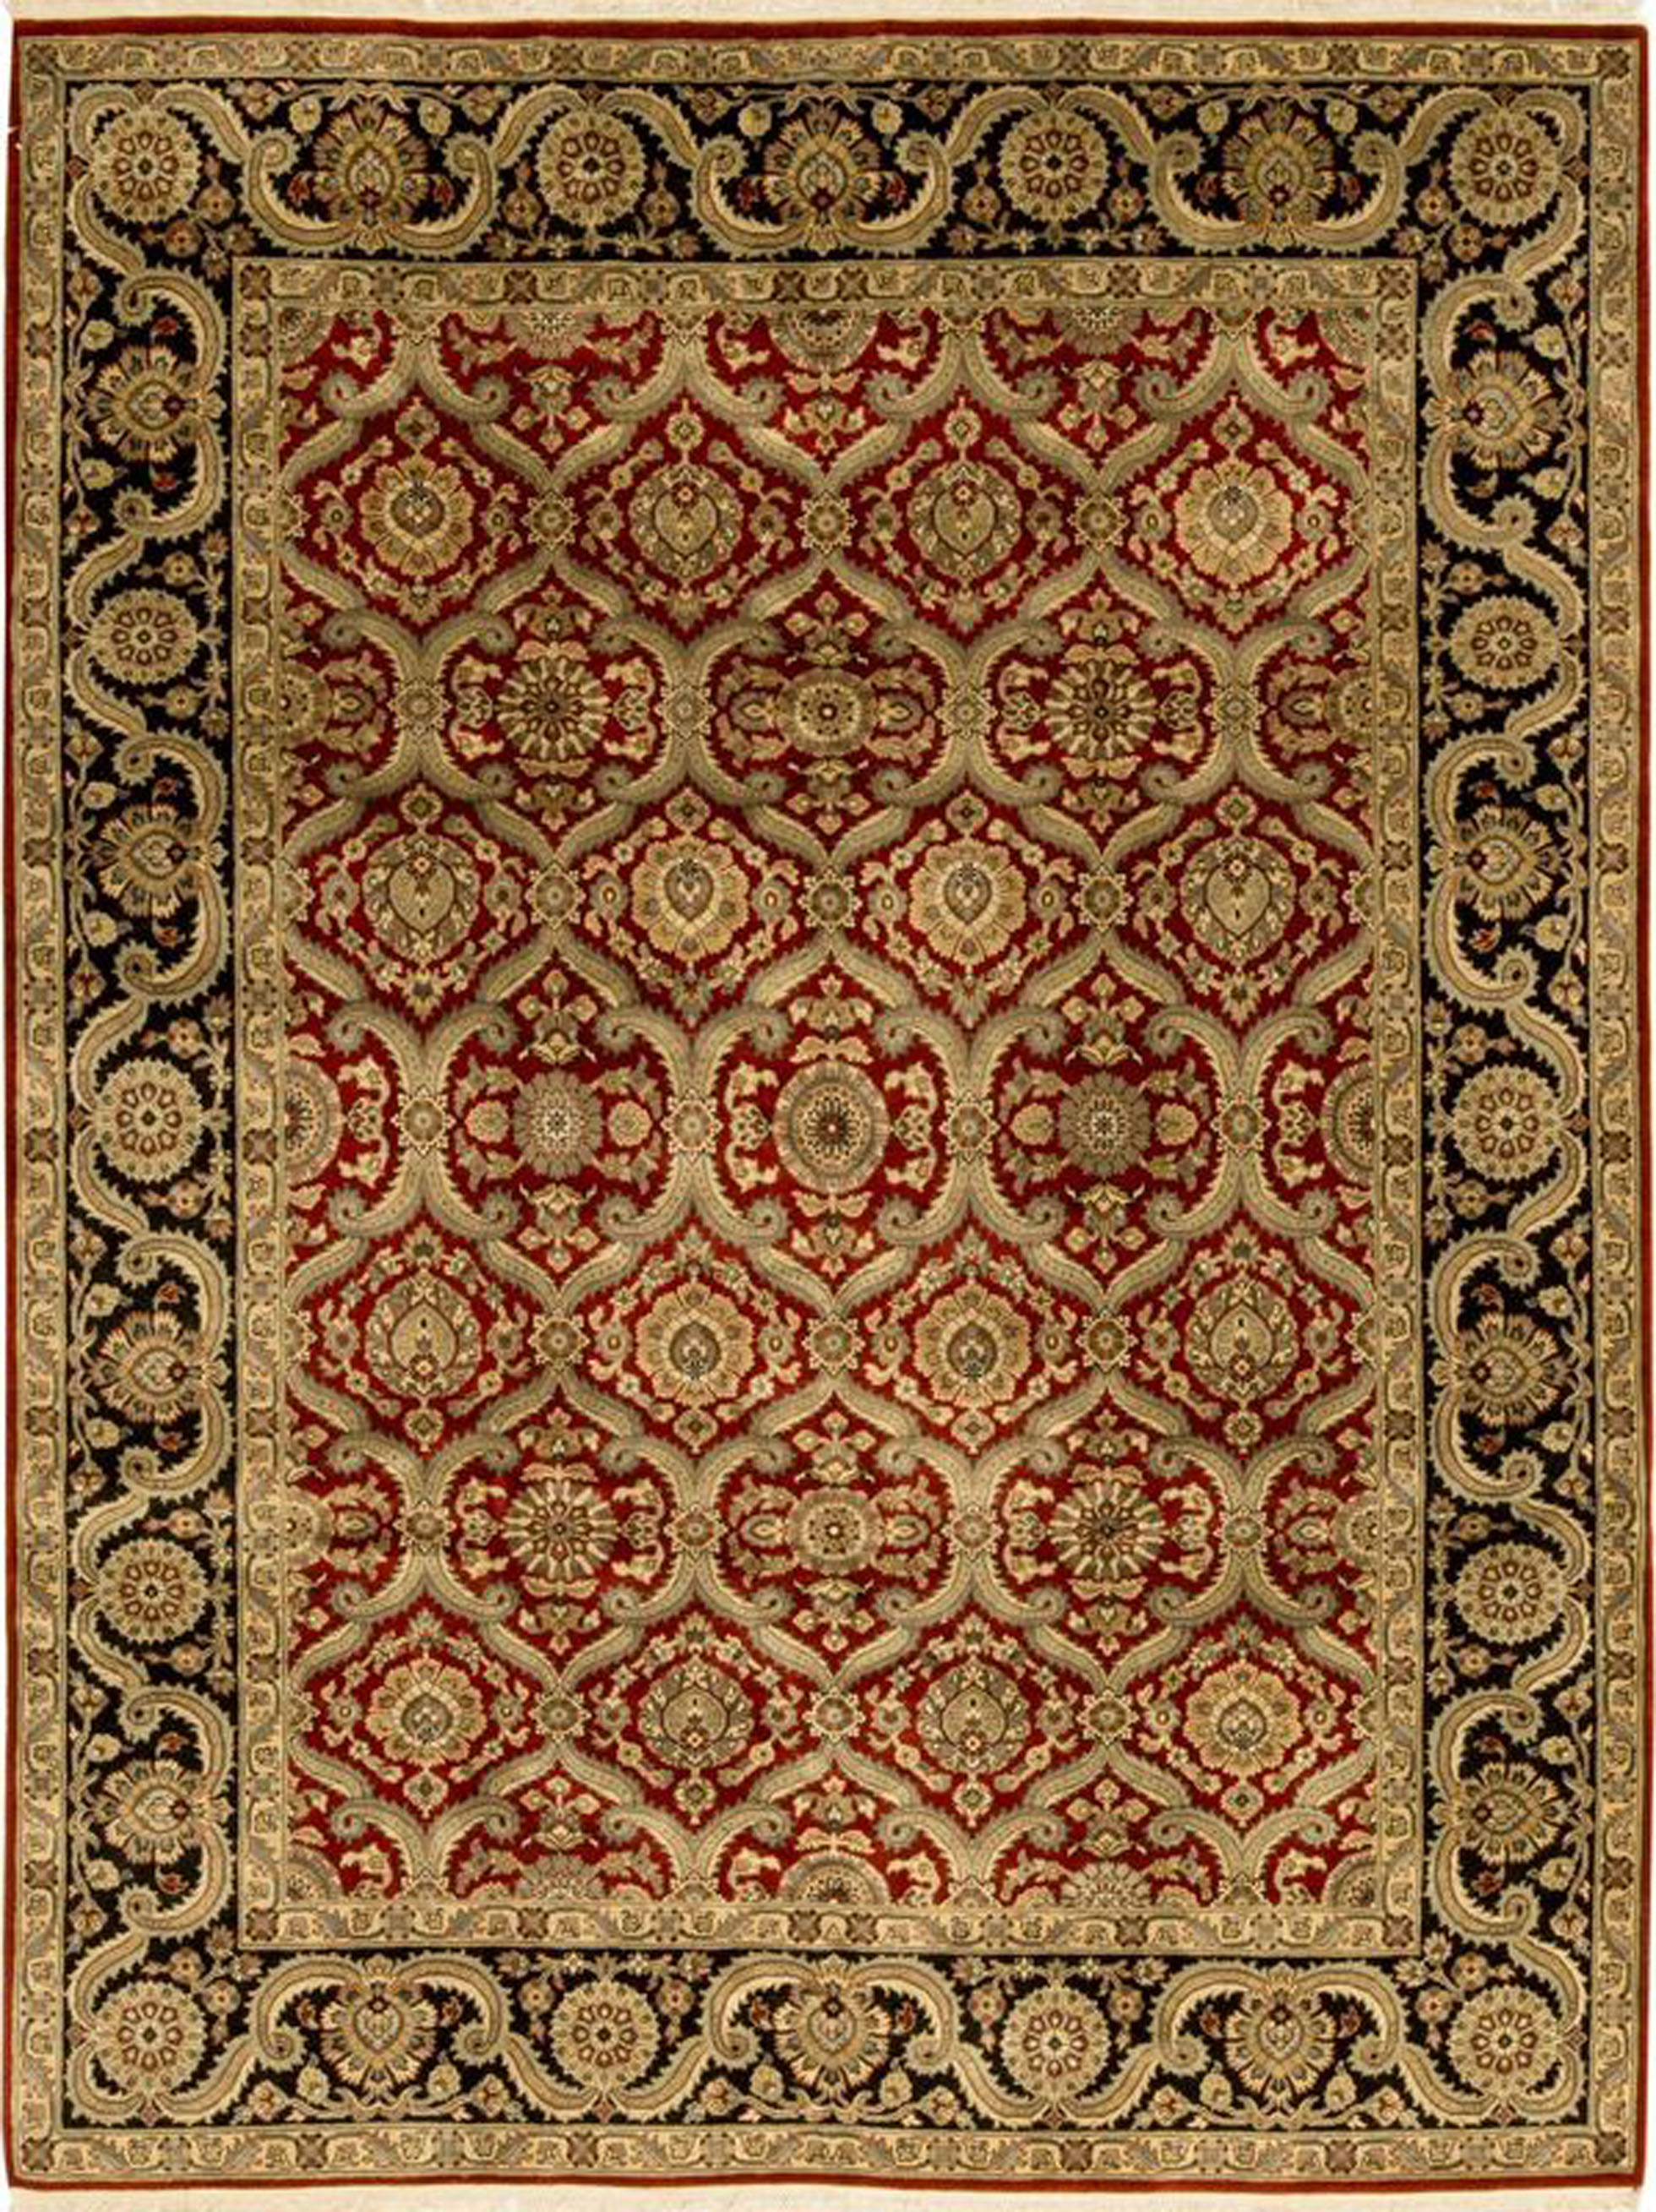 hand woven rugs zoom image traditional hand woven rug 9 2 x 11 11 traditional, wool, YSTAYPG